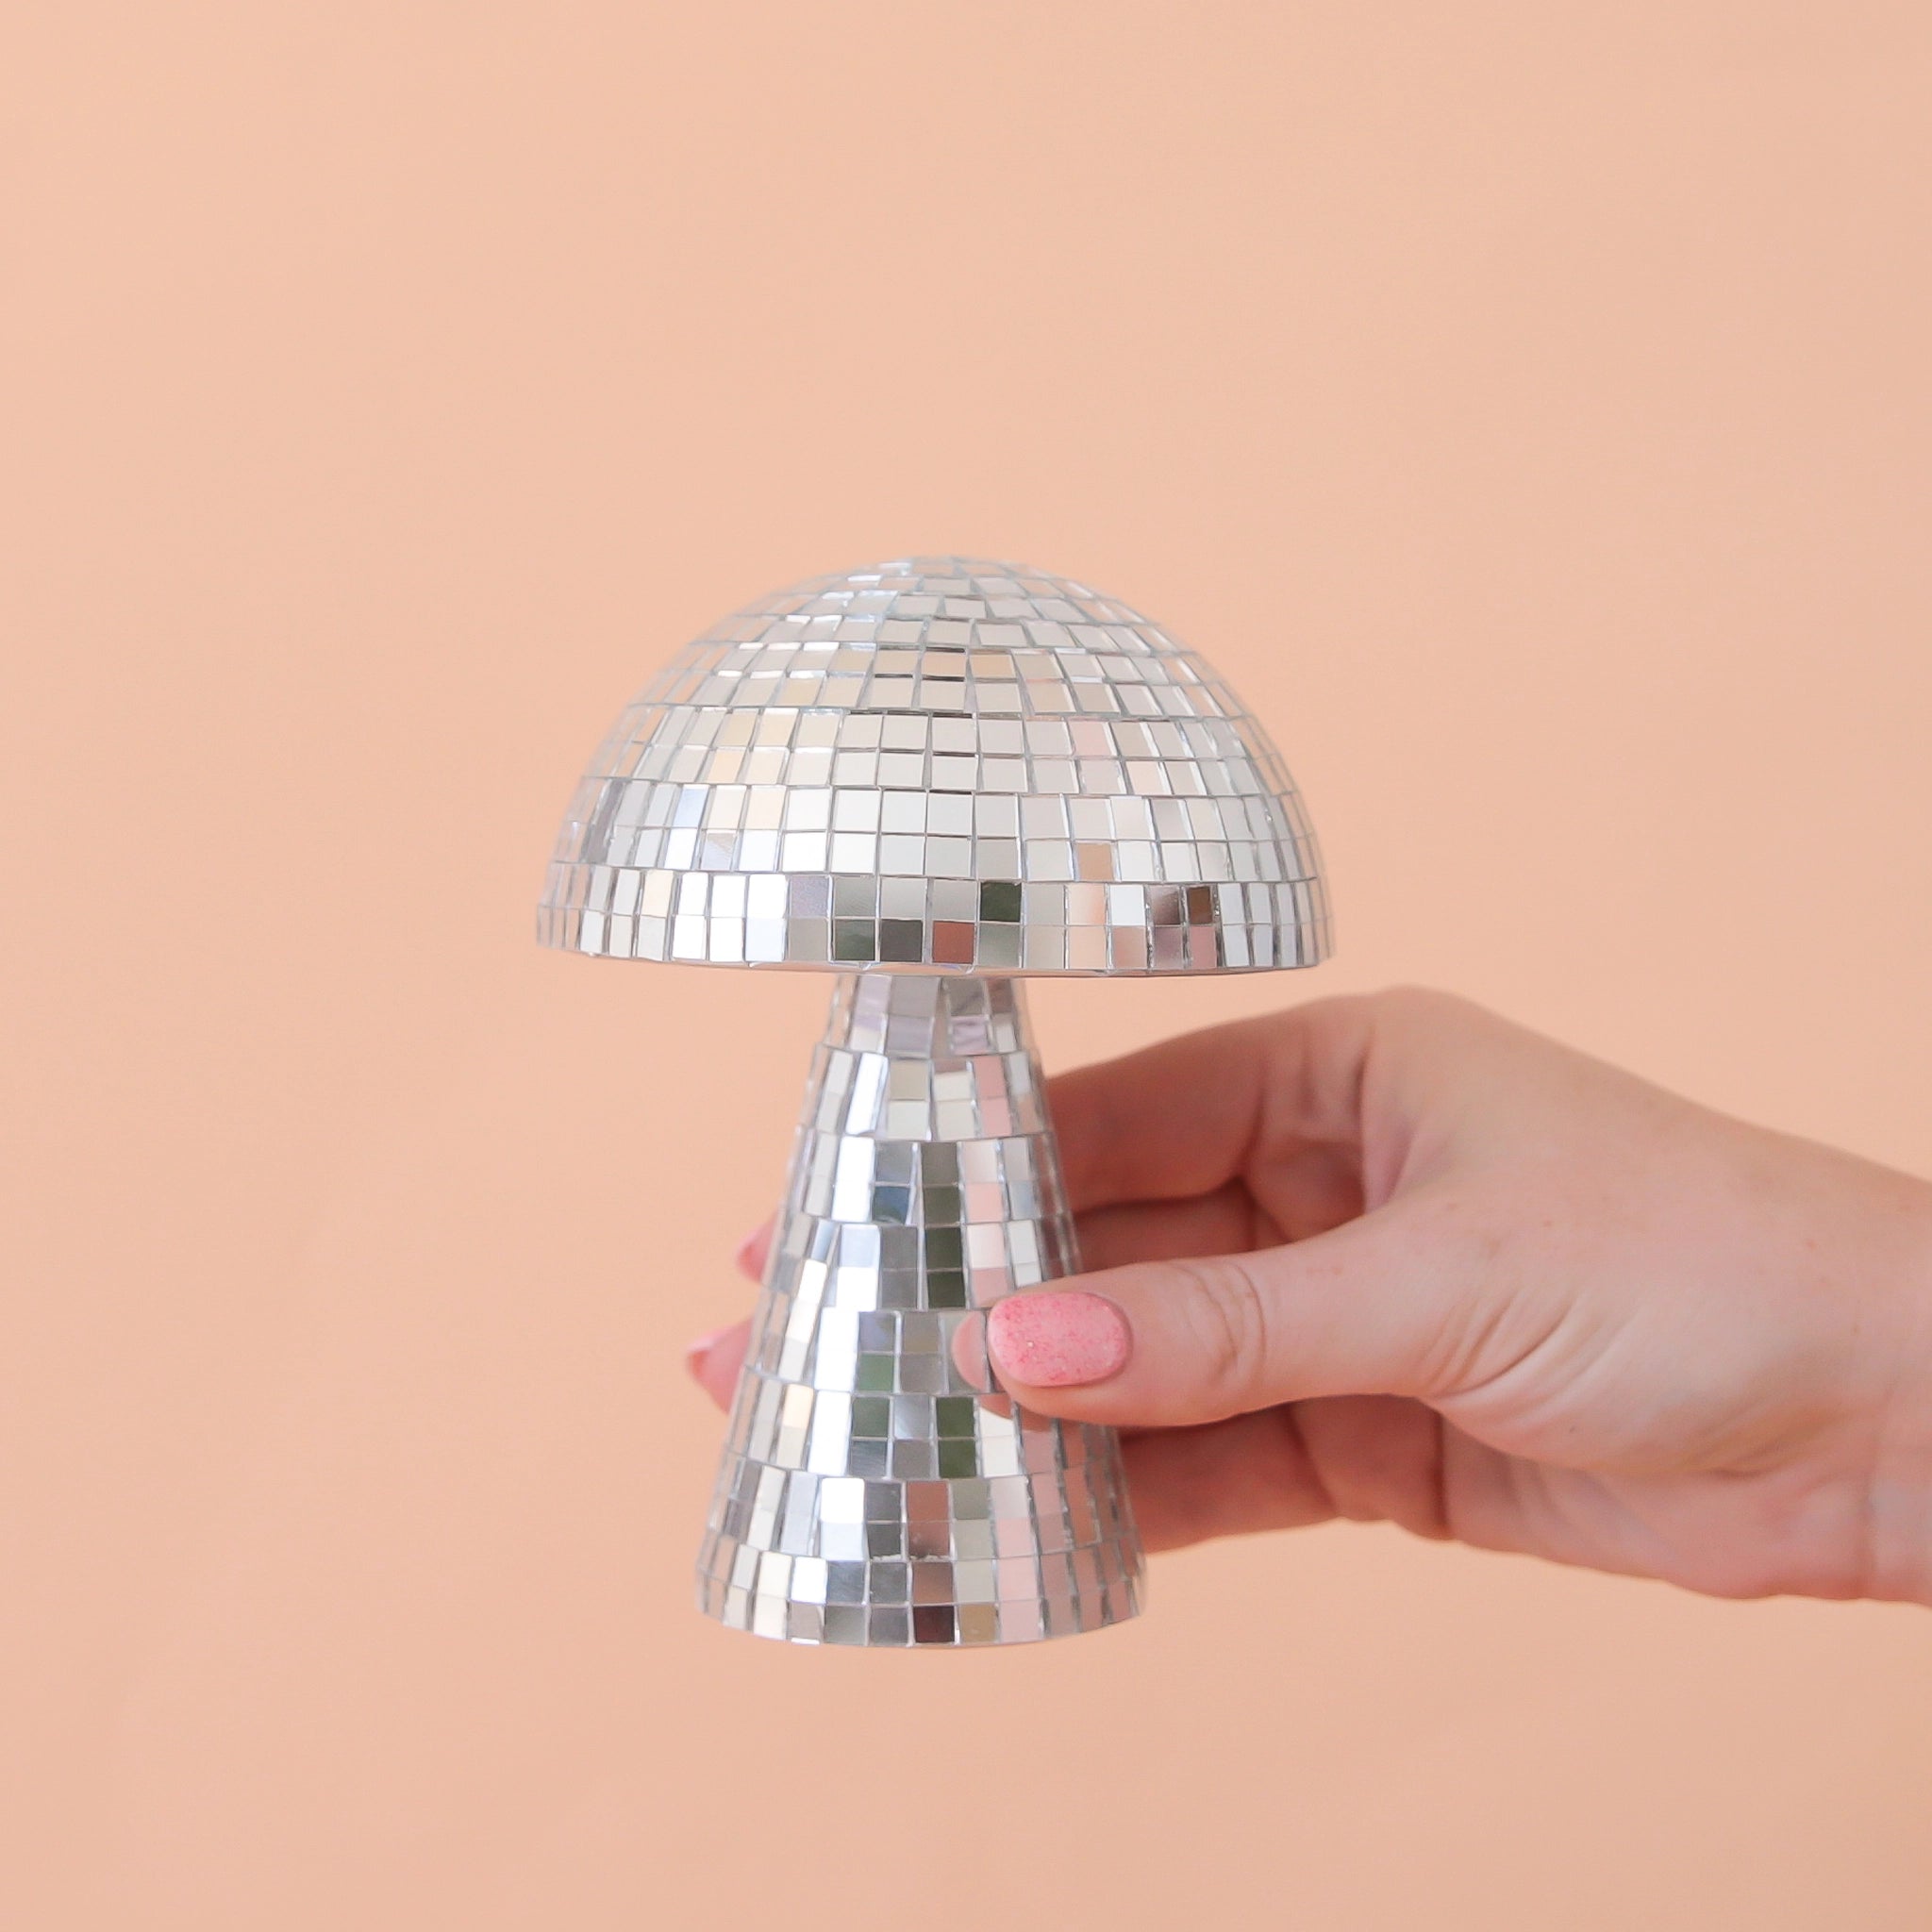 On a peach background is a disco mushrooms with mirrored square pieces all over.